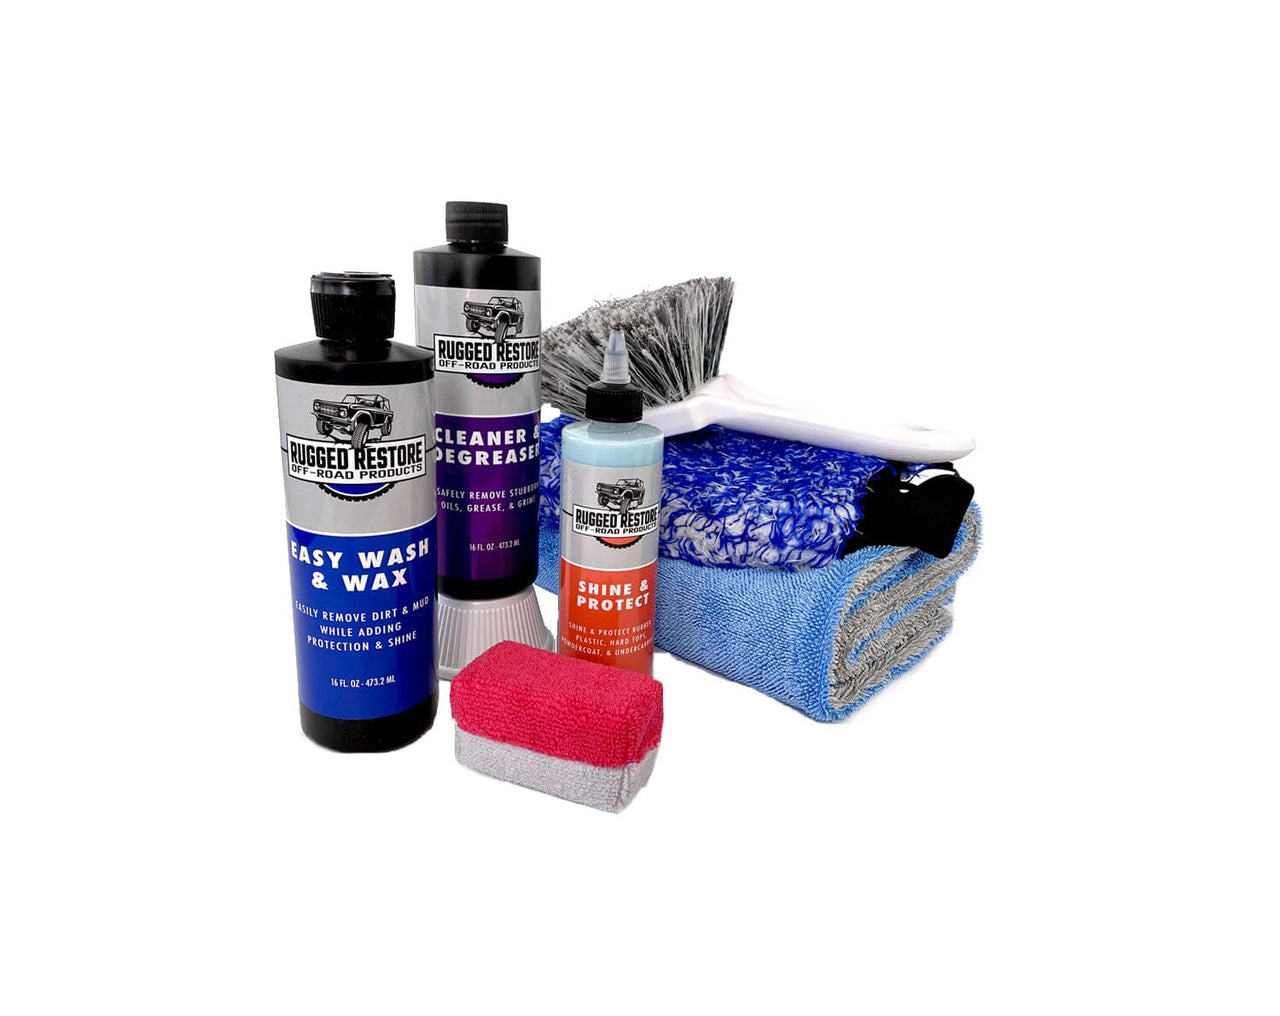 The Detailing Starter Kit - Everything You Need To get Started